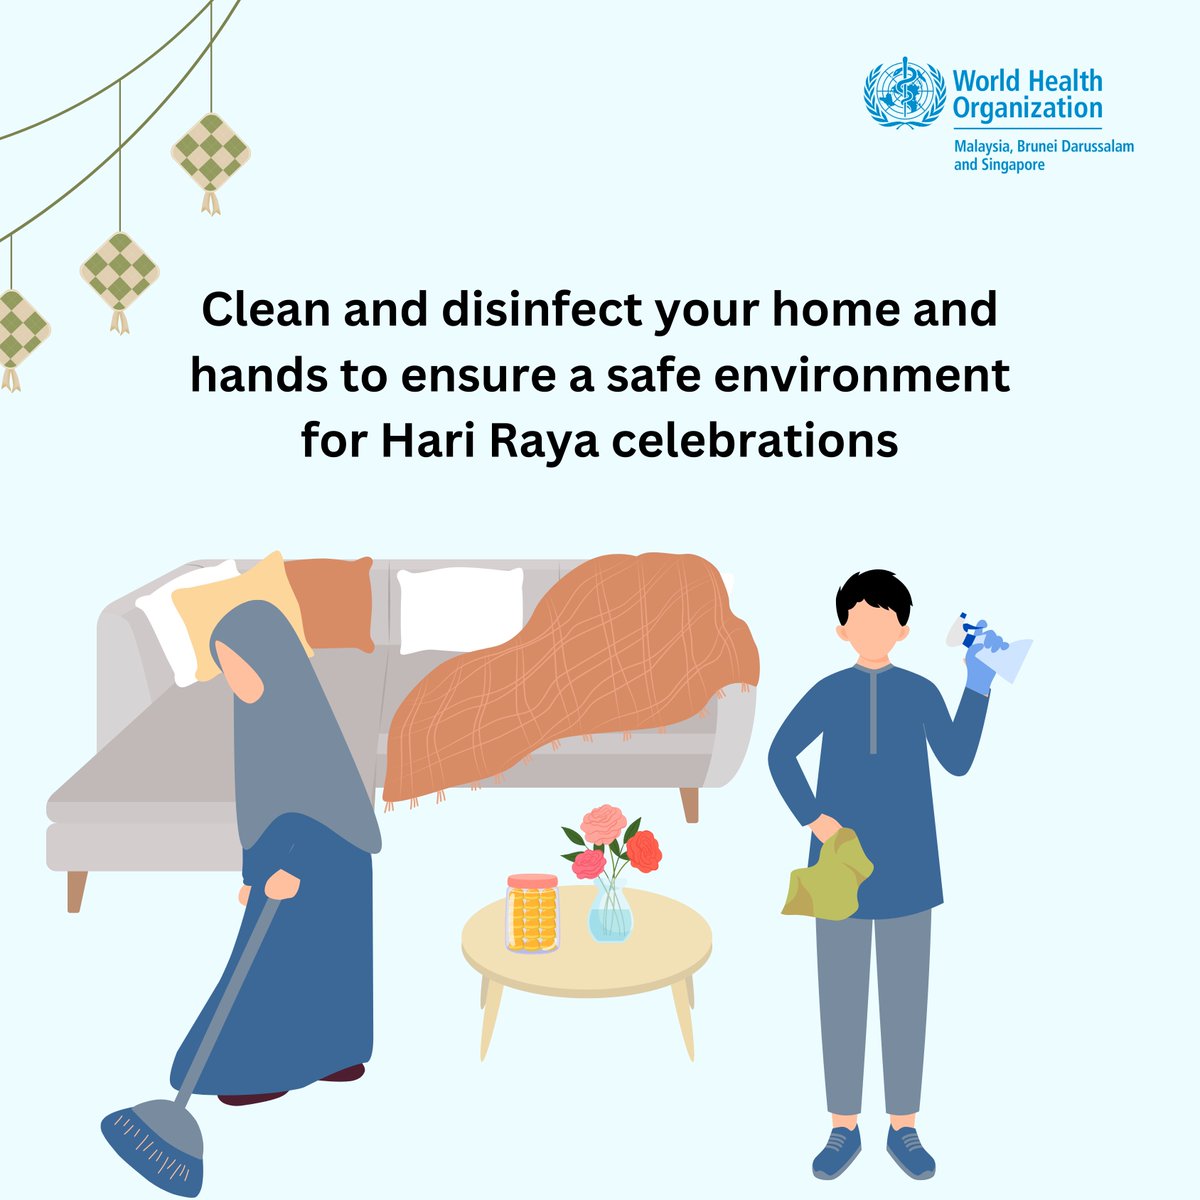 To ensure a safe environment for Hari Raya festivities at home, clean and disinfect your home regularly. Don't forget to clean your hands too! 👐💧🧼